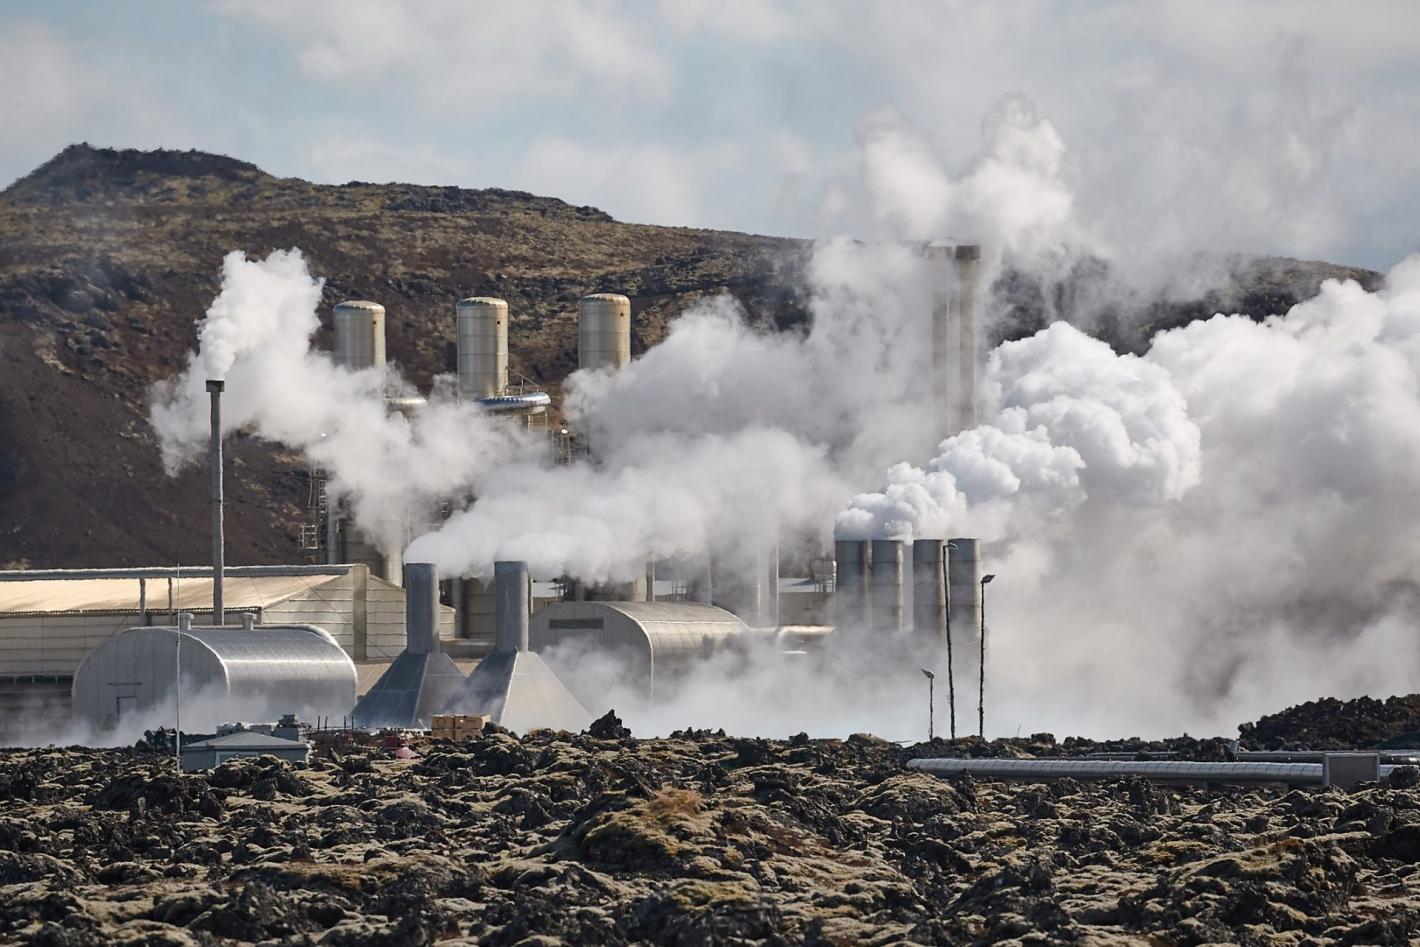 What Are The Challenges Of Geothermal Energy?